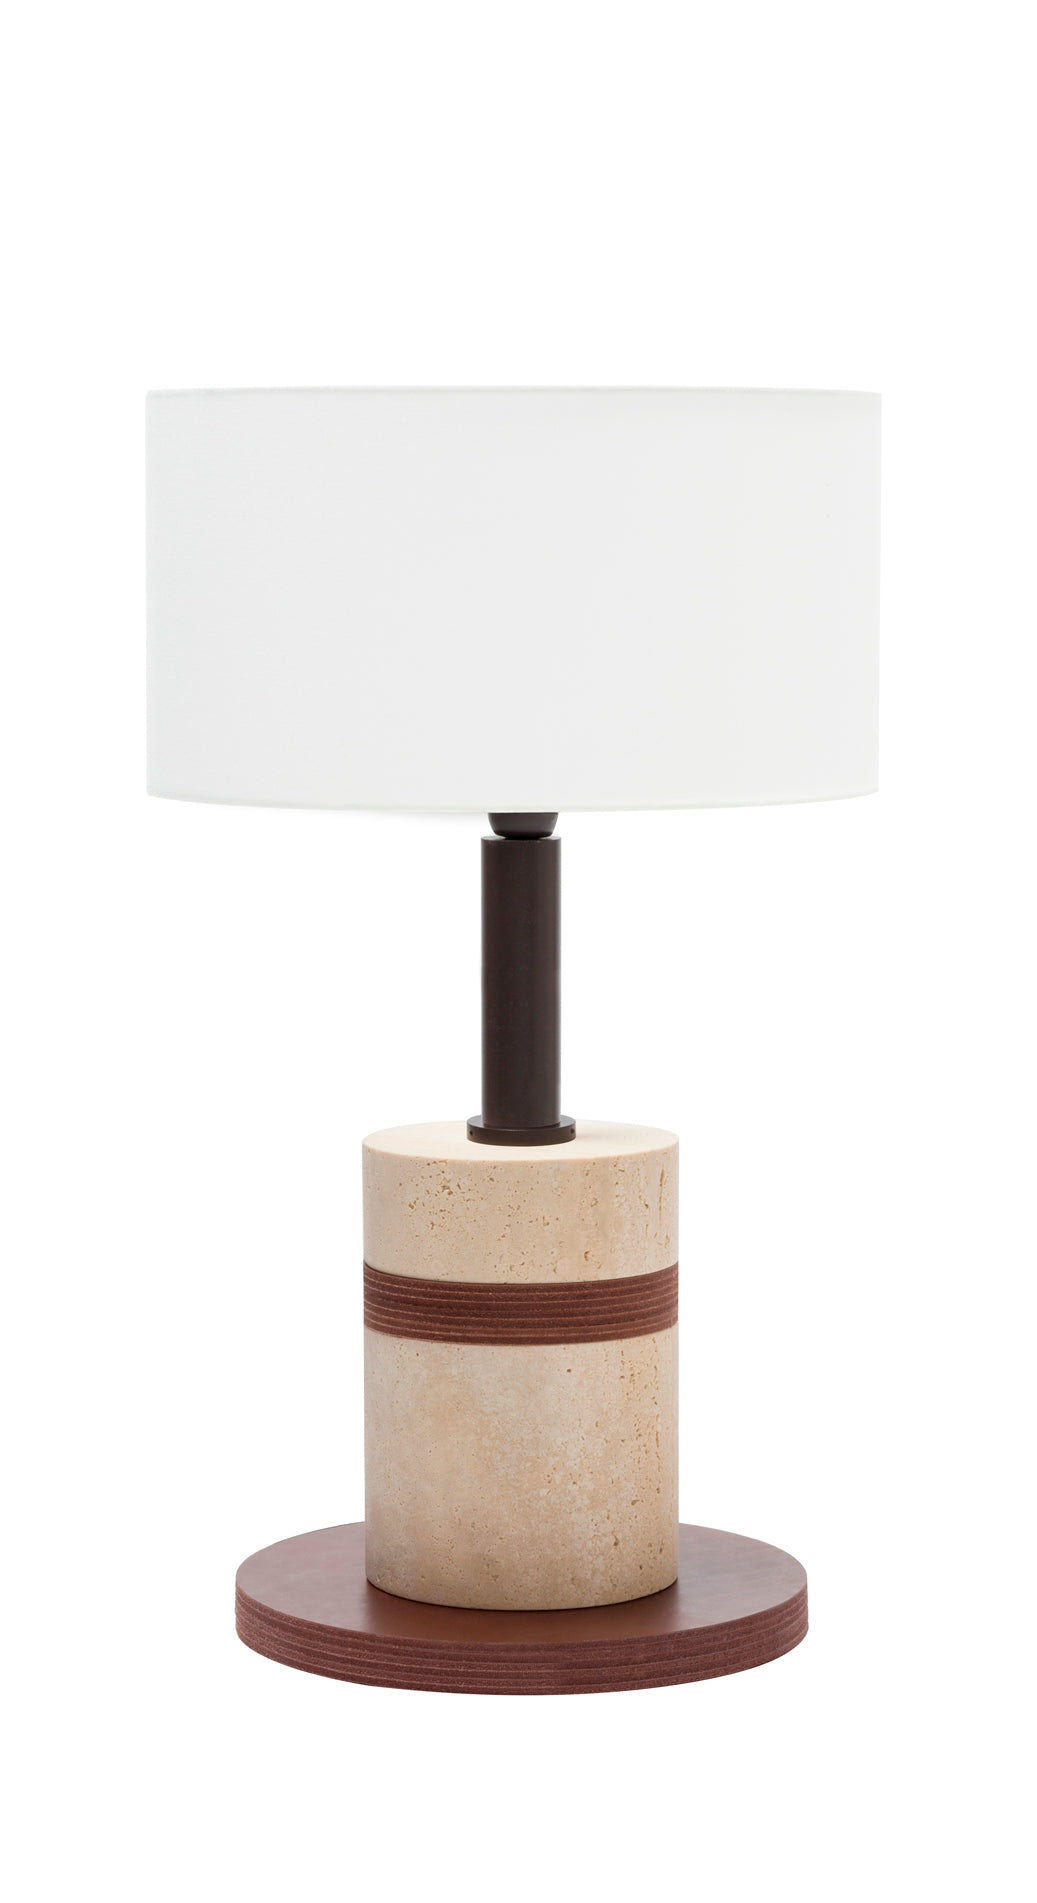 Luxor Table Lamp by Rabitti 1969 | Dark-Stained Metal Structure with Saddle Leather and Stone Discs | Fine Linen Lampshade | Designed by Simone Fanciullacci | Explore a Range of Luxury Lighting Options at 2Jour Concierge, #1 luxury high-end gift & lifestyle shop